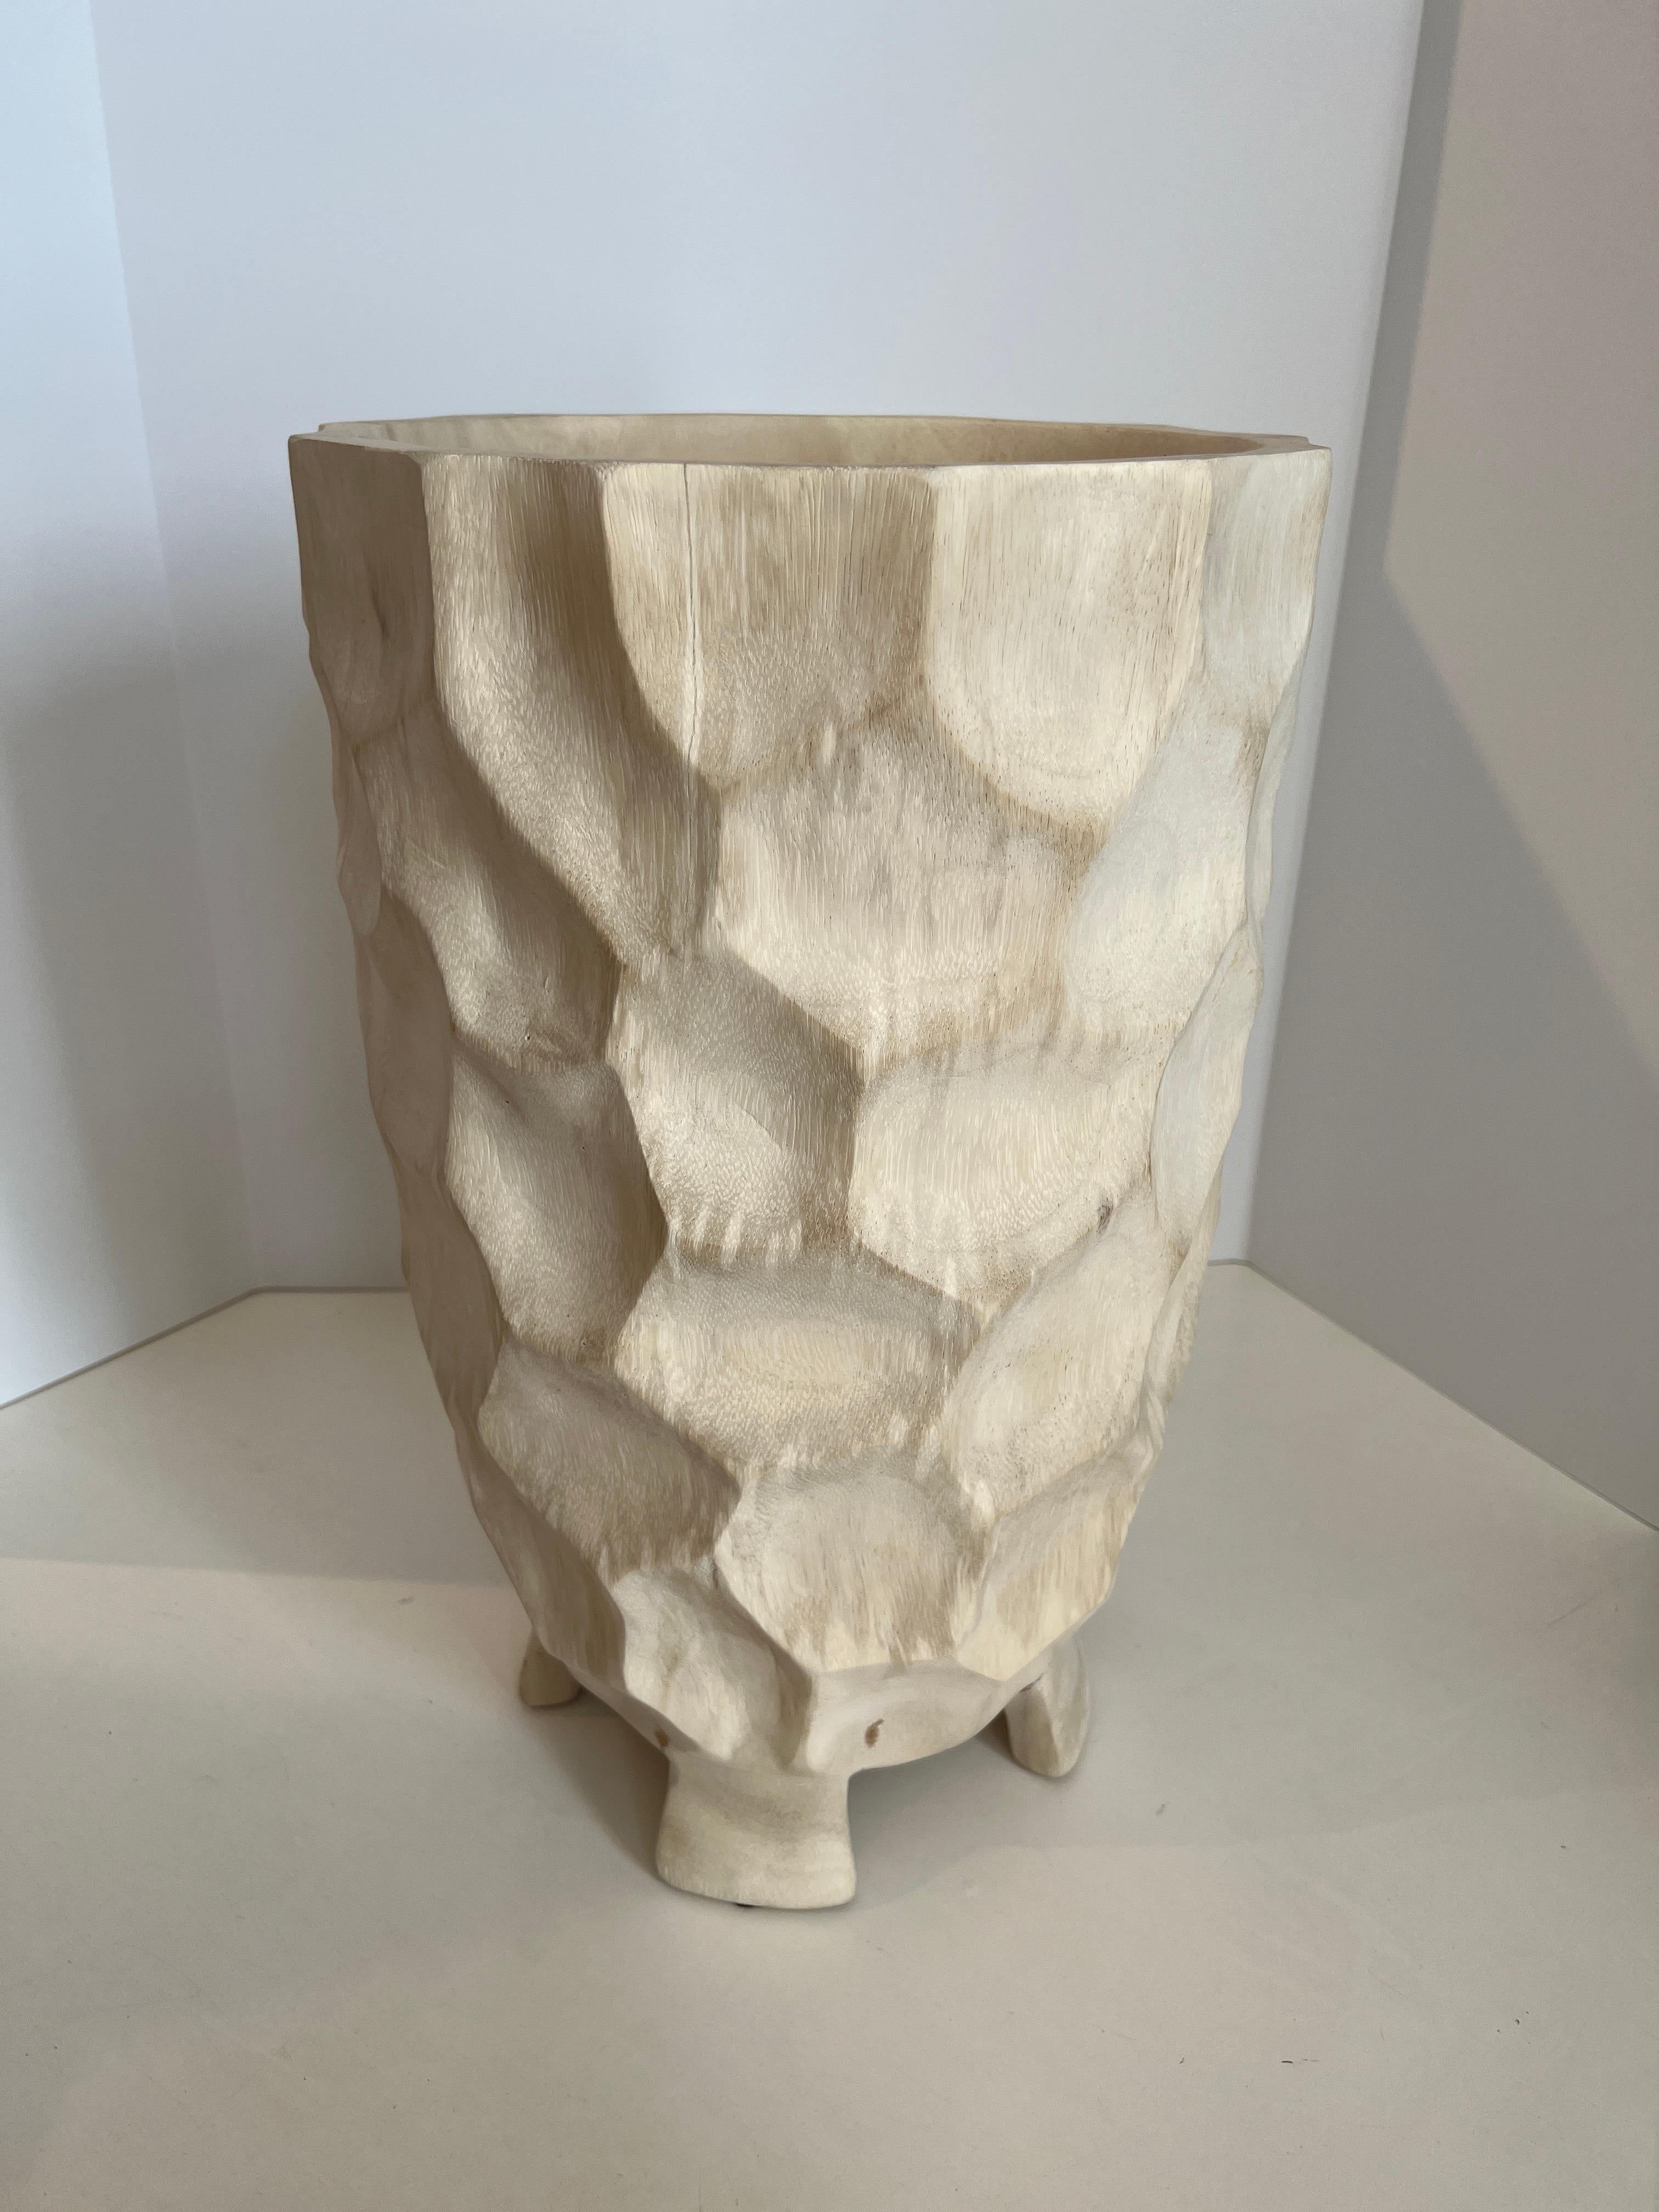 Tall wooden vase with hand carved mottled surface the creates light and shadow. Perched on four feet.